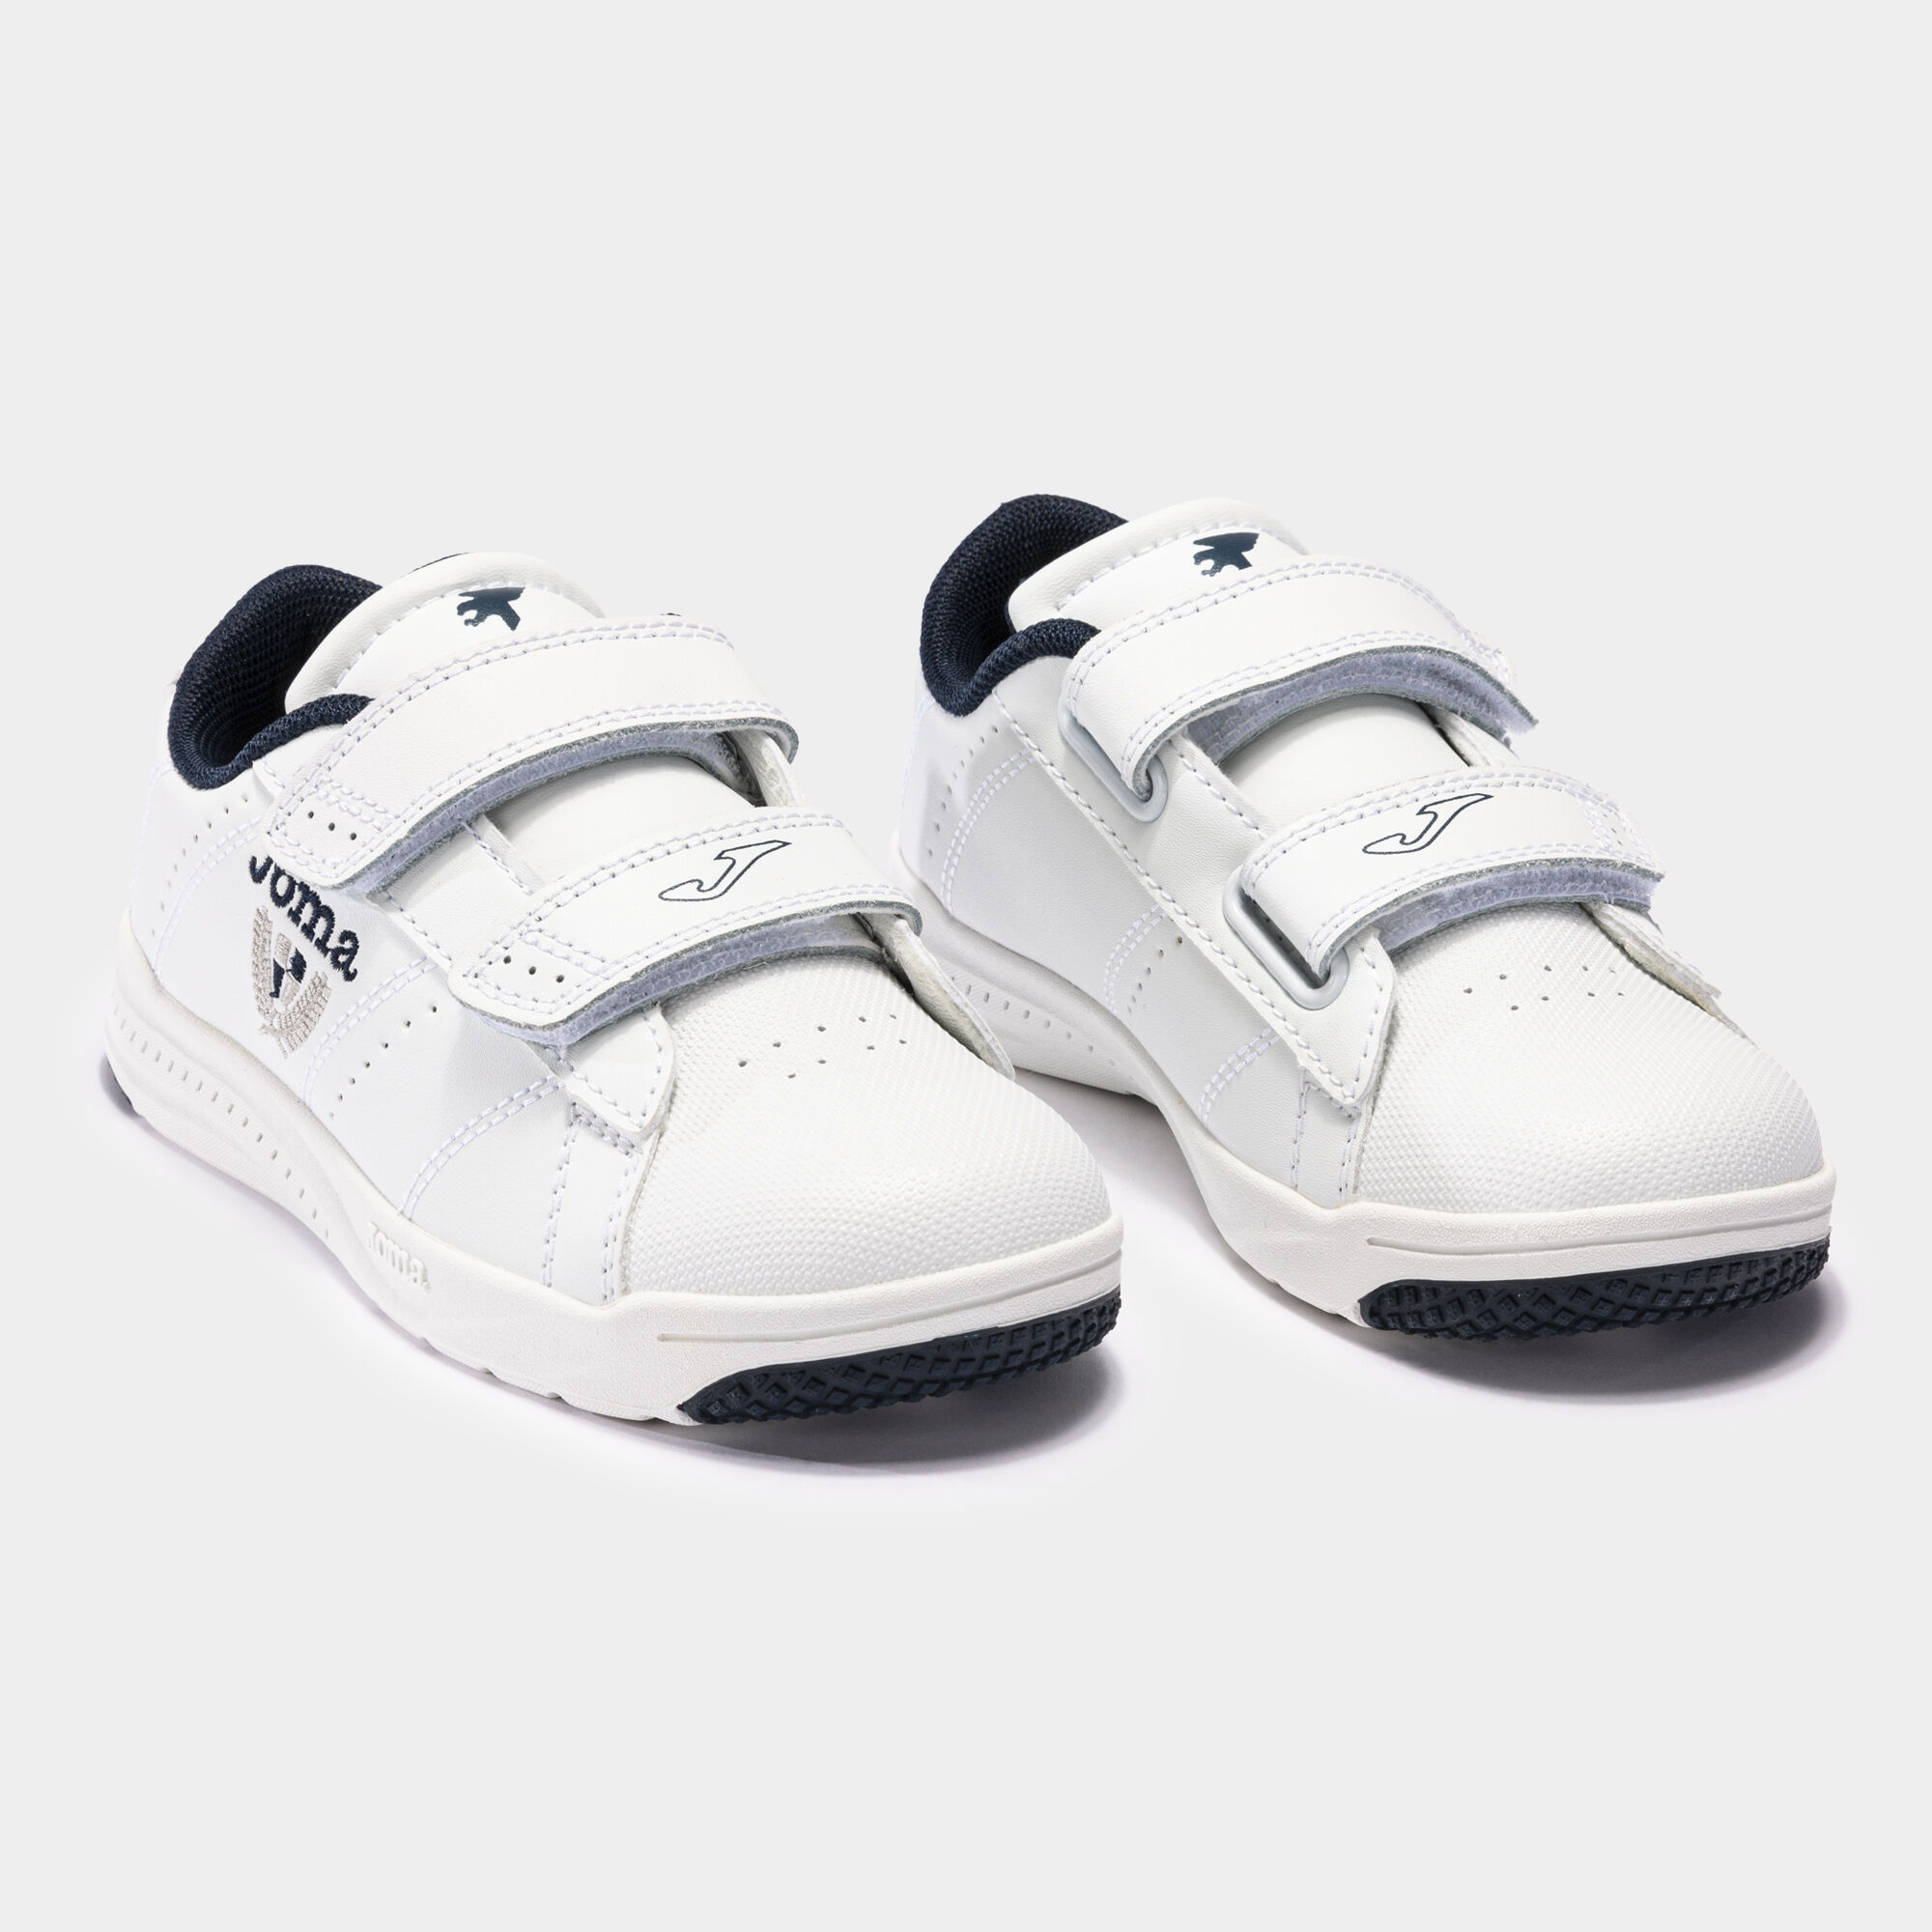 Casual shoes W.Play Jr 23 junior white navy blue